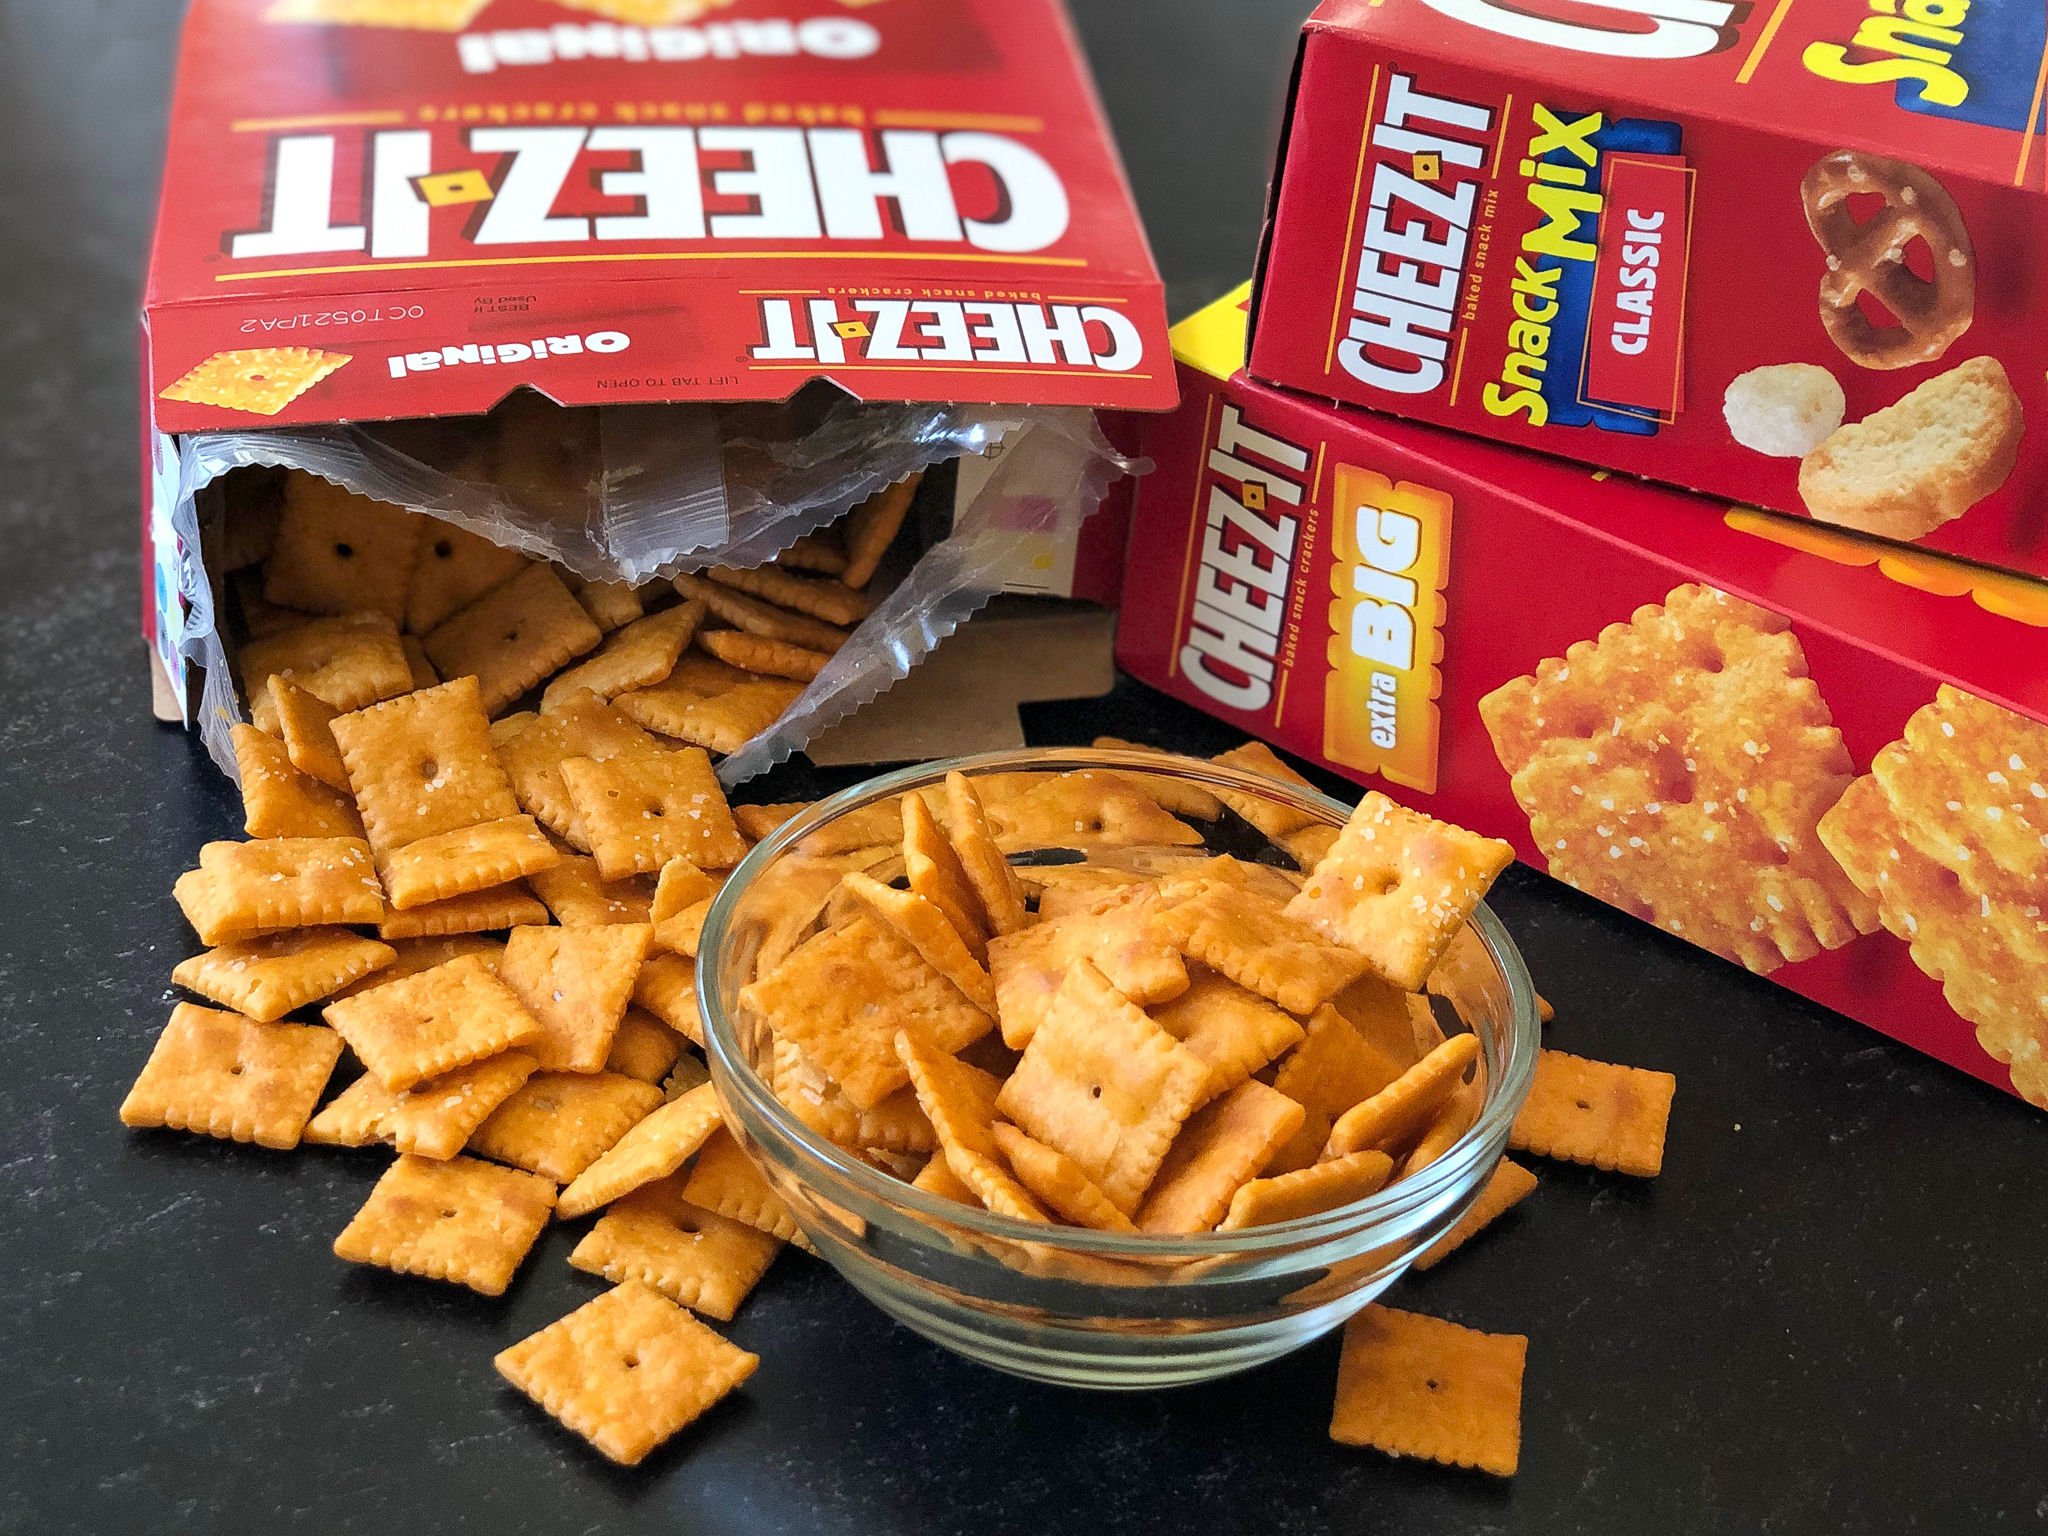 Pick Up A Great Deal On A Bowl Season Must-Have...Cheez-It Crackers On Sale 2/$6 At Publix! on I Heart Publix